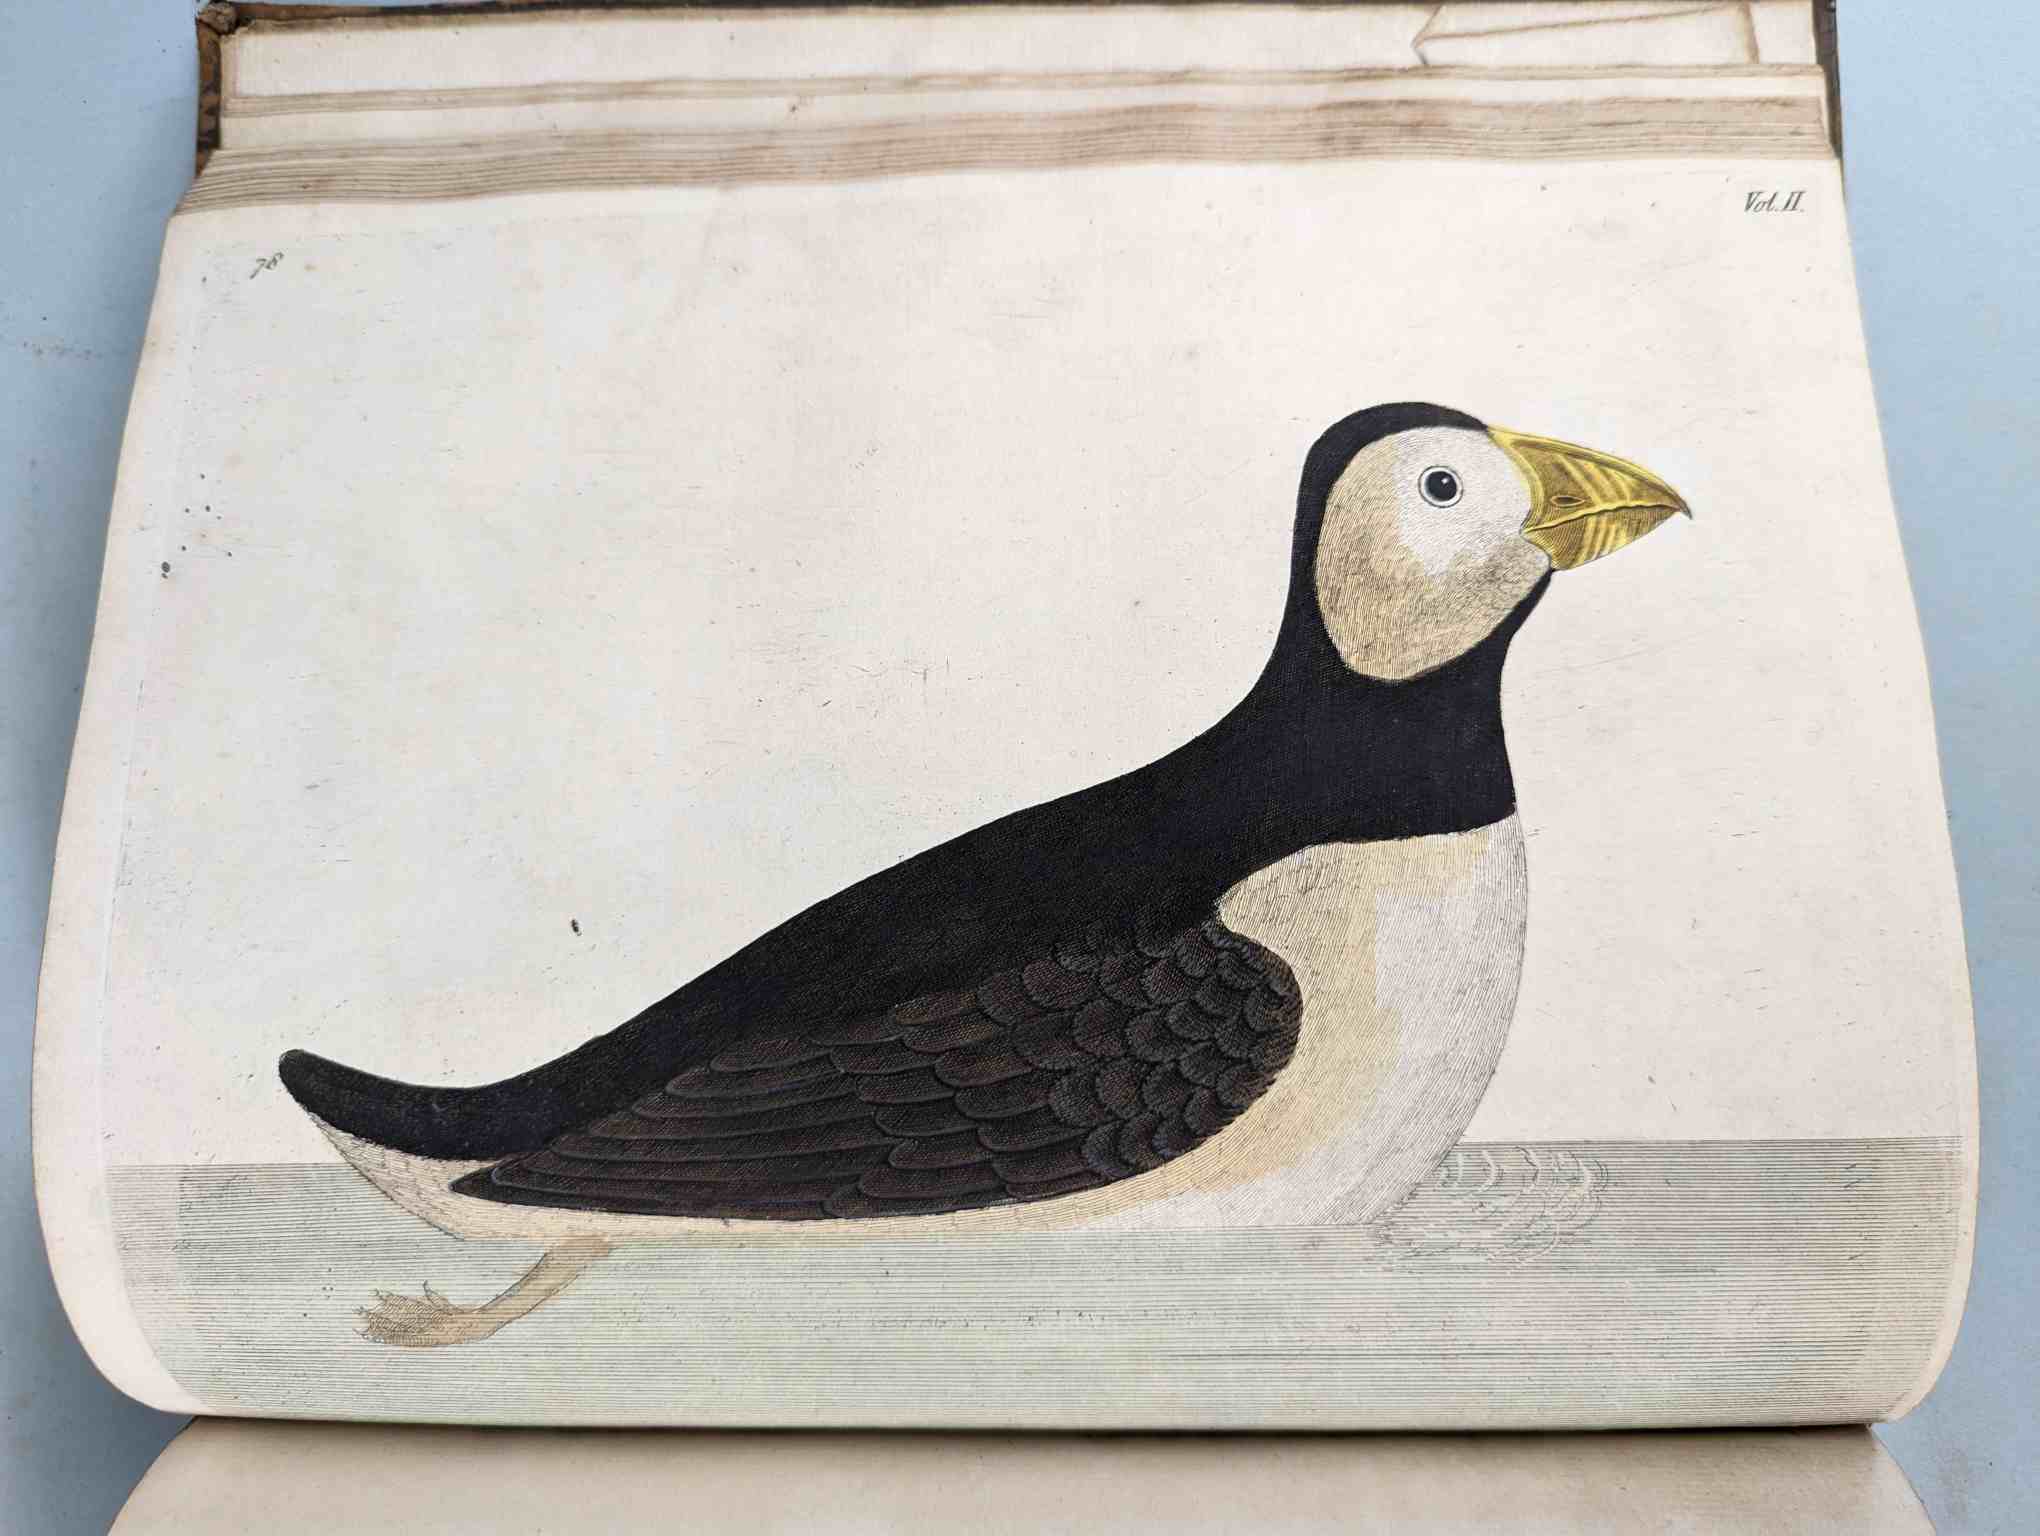 ALBIN, Eleazar. A Natural History of Birds, to which are added, Notes and Observations by W. - Image 182 of 208